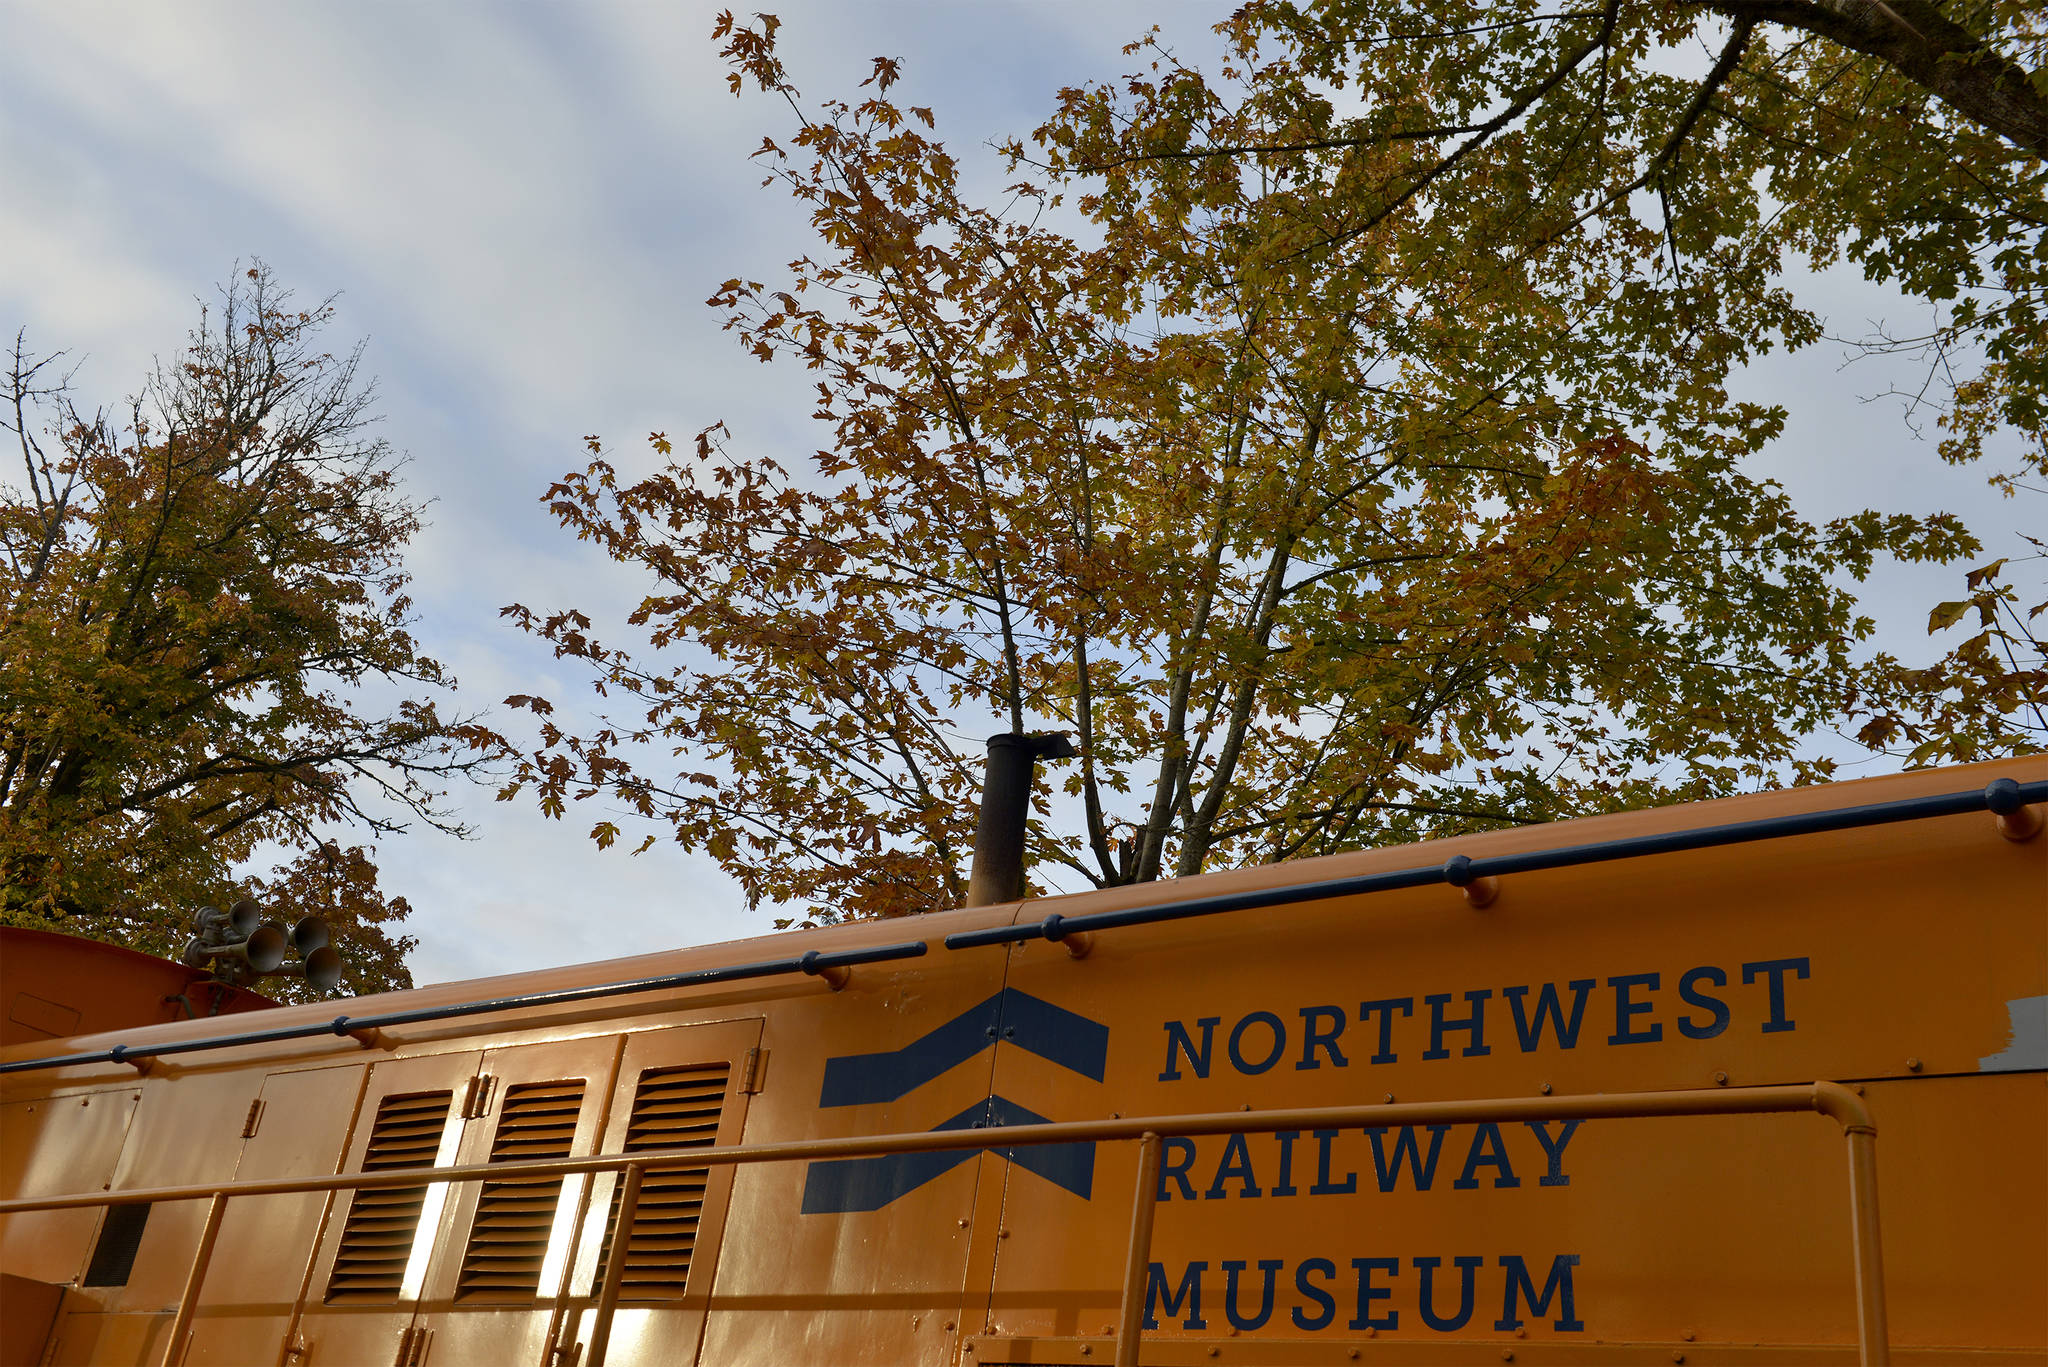 The Northwest Railway Museum in Snoqualmie received $50,000 in relief funding. Photo courtesy of the Northwest Railway Museum